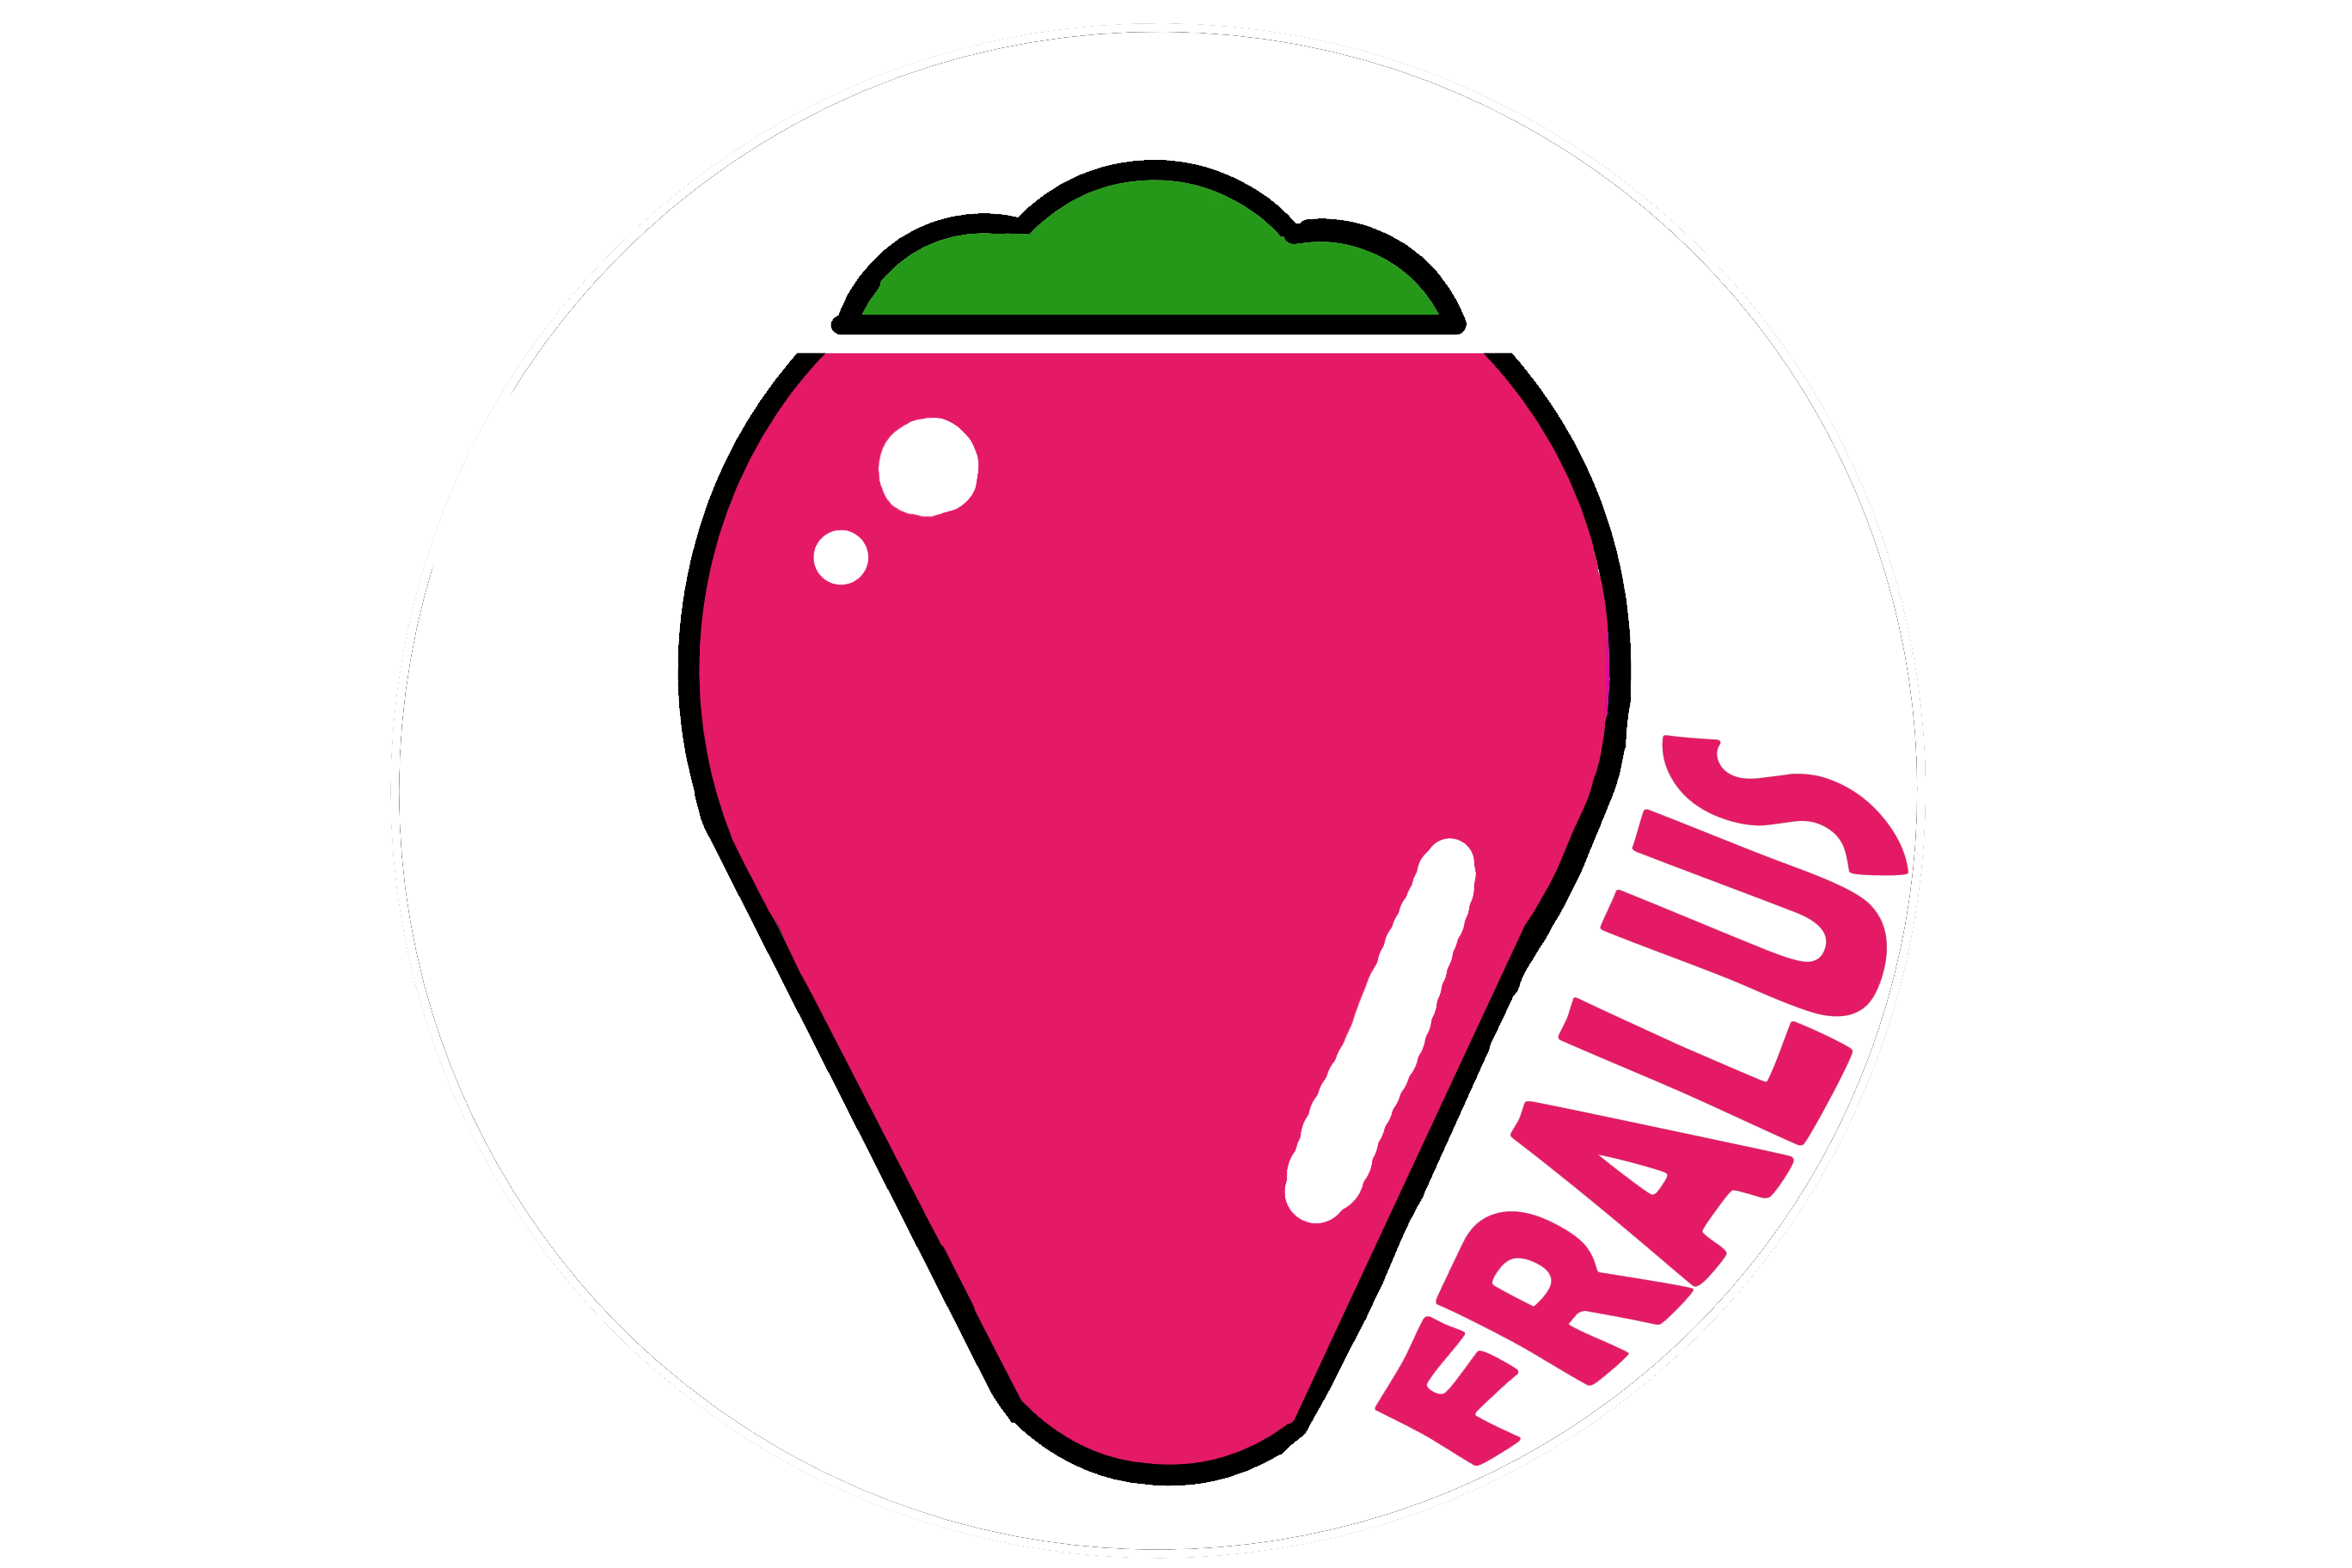 Launching Fralus